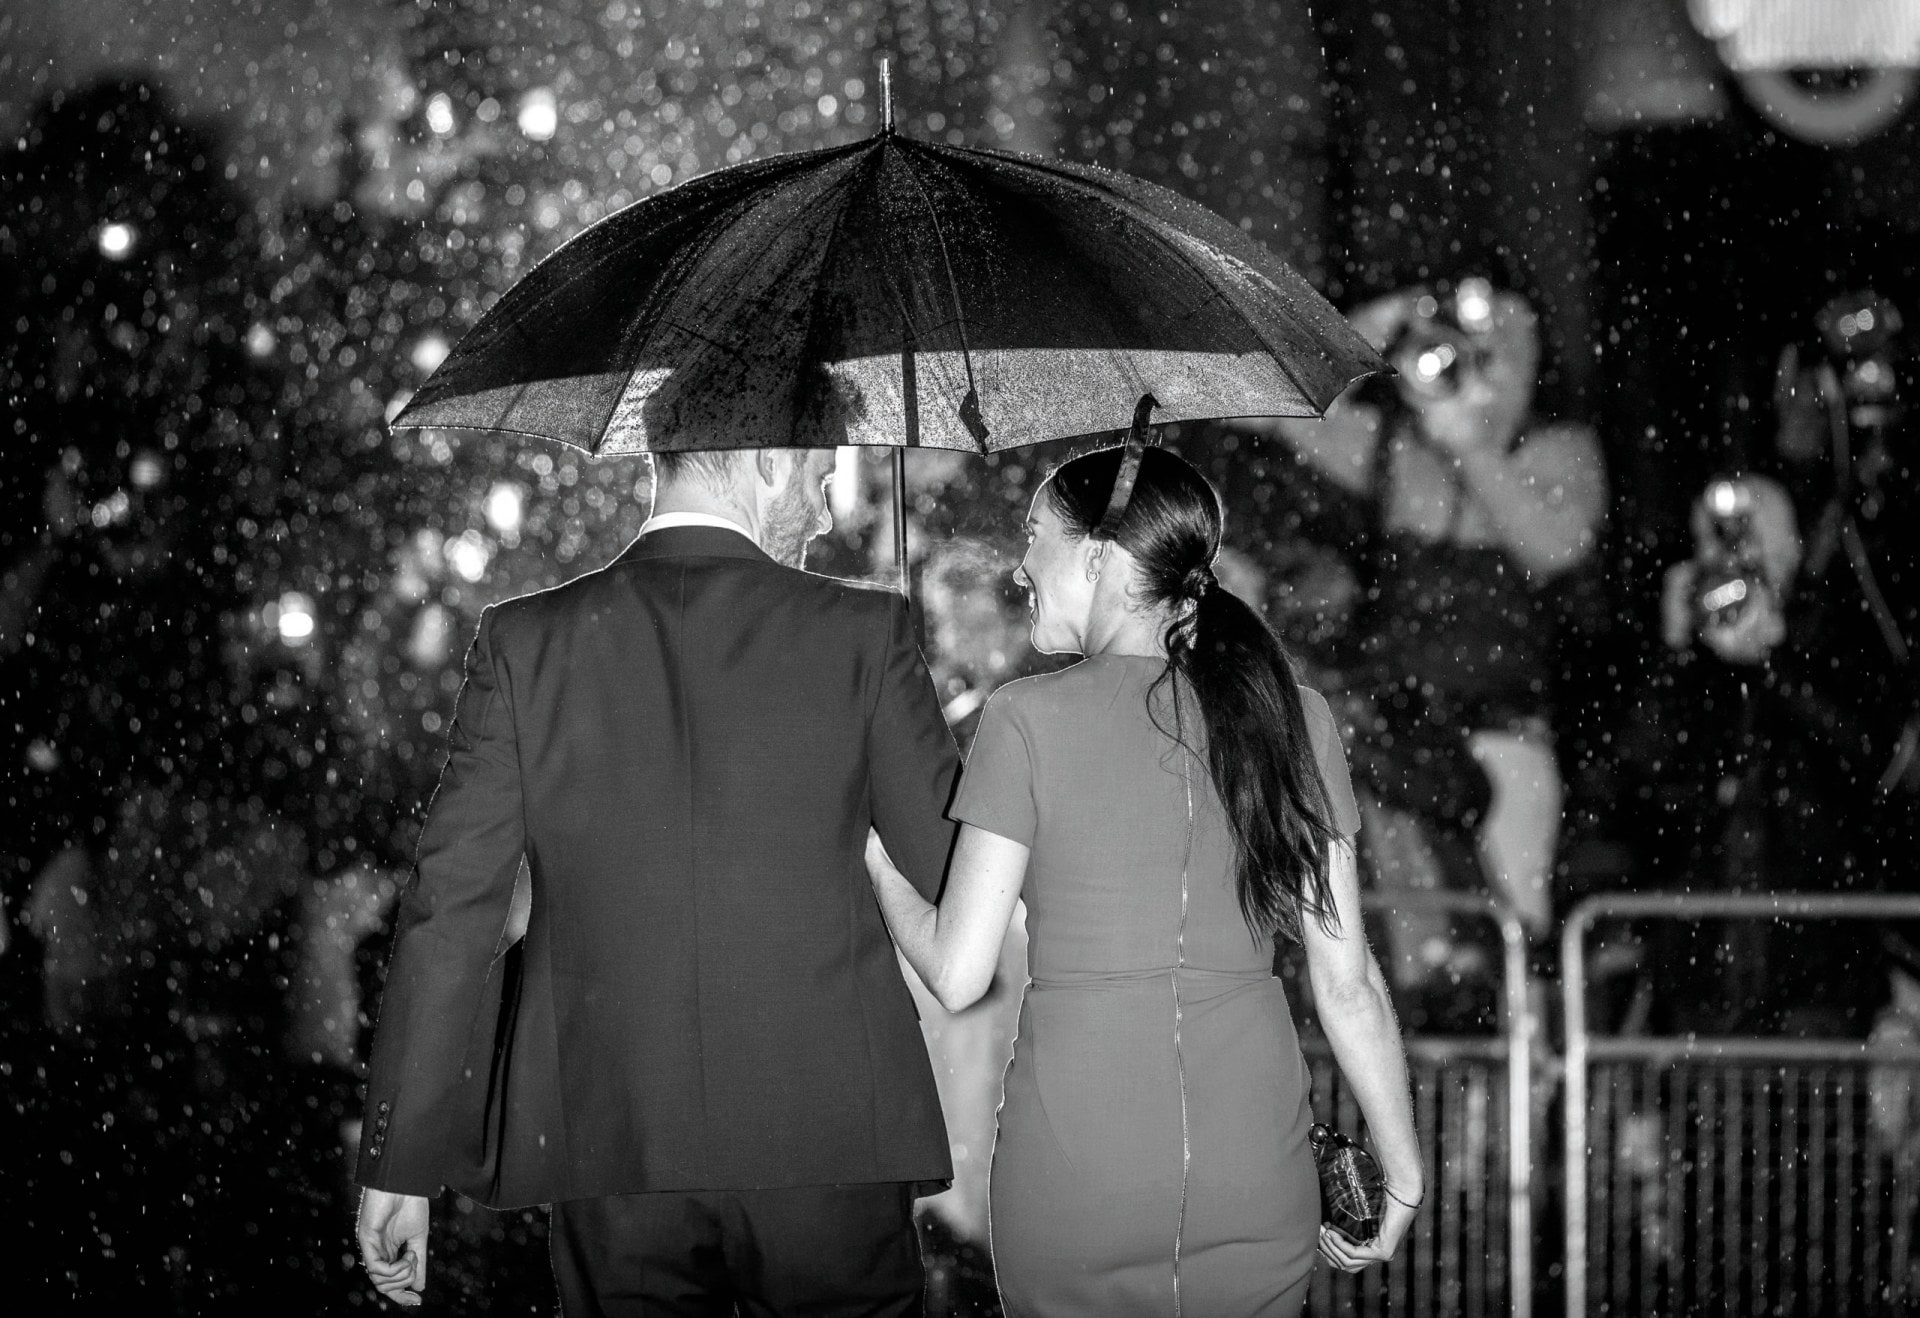 Harry and Meghan in London event standing under umbrella